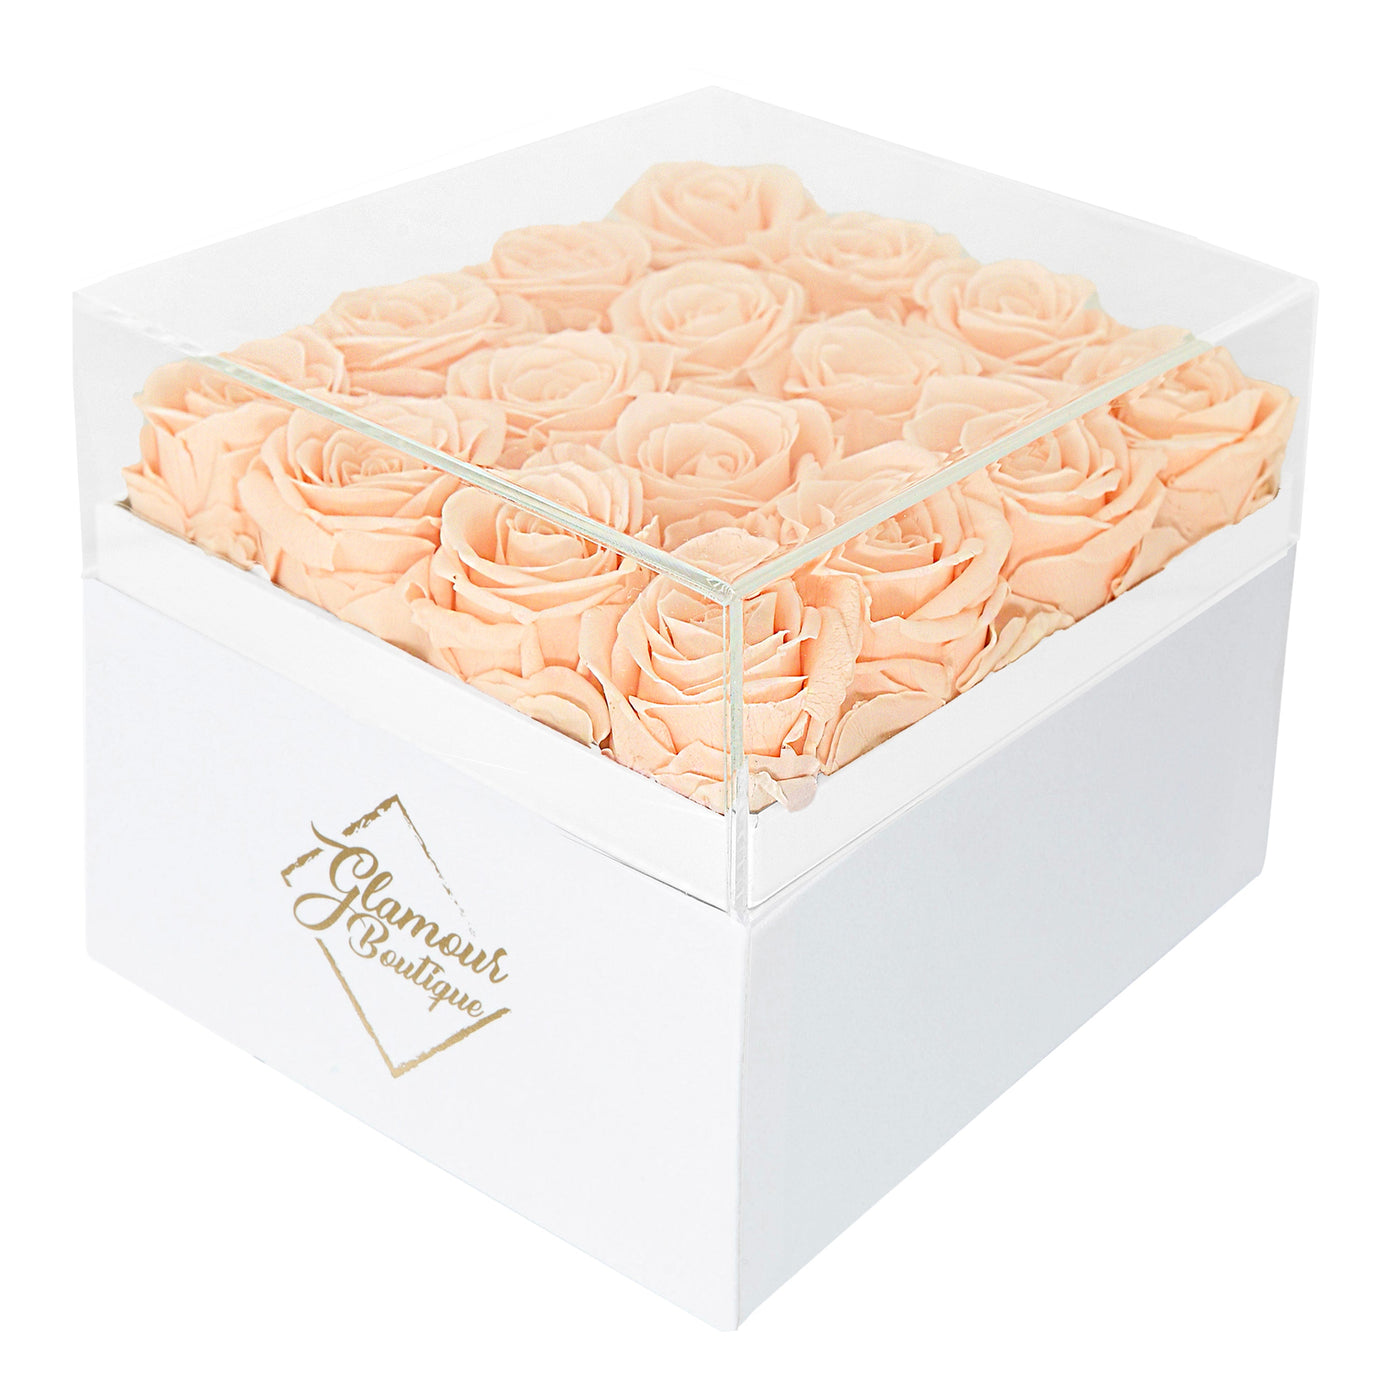 16 Preserved Roses Cased in White Box with Acrylic Cover - Pink